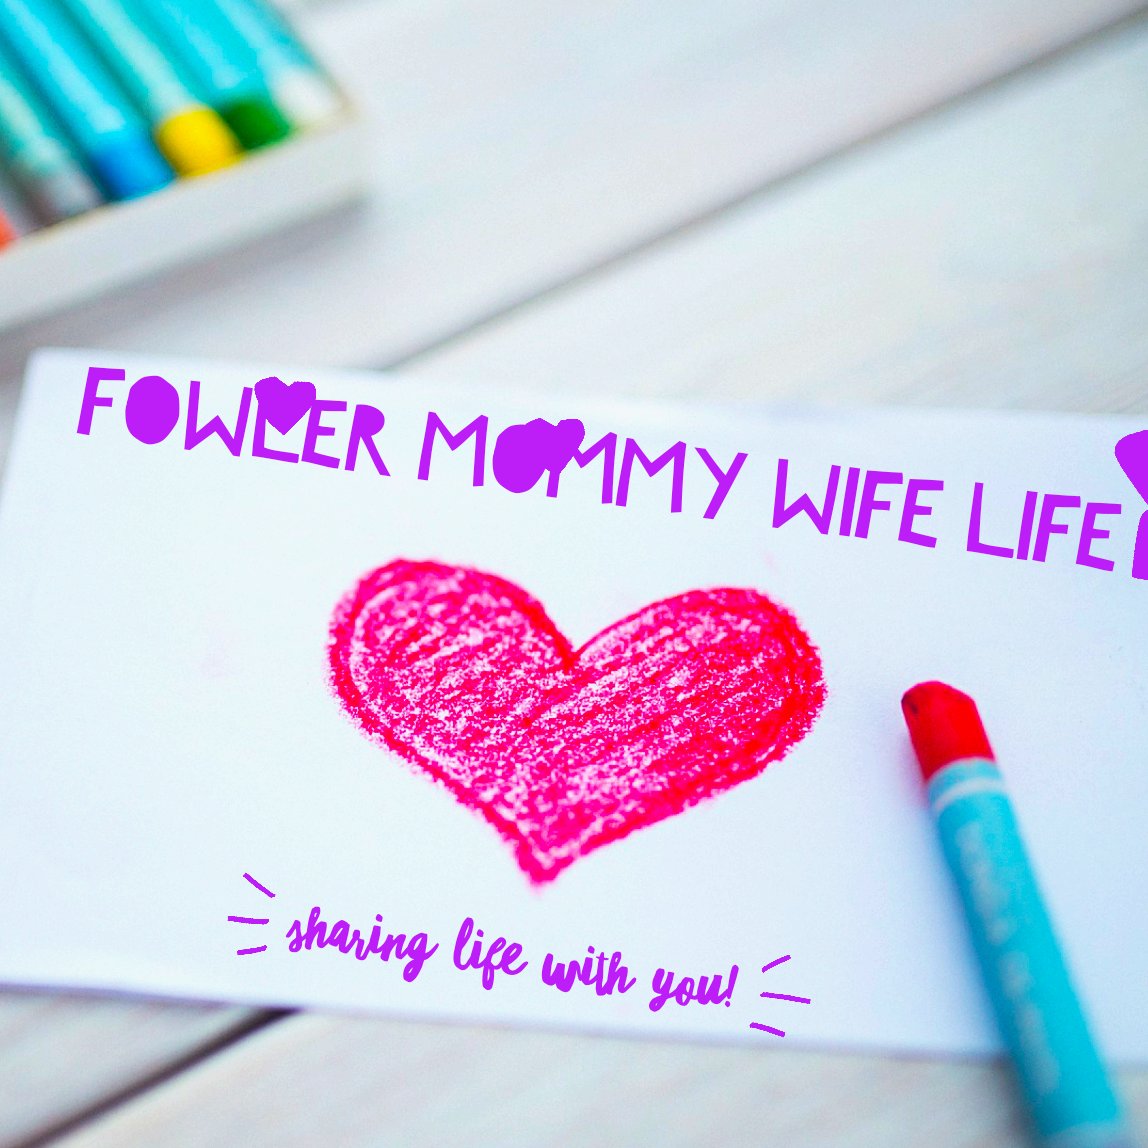 Welcome to Fowler Mommy Wife Life! I am so happy that YOU are here!! I love to write about Jesus and how awesome and faithful He has been in our lives.